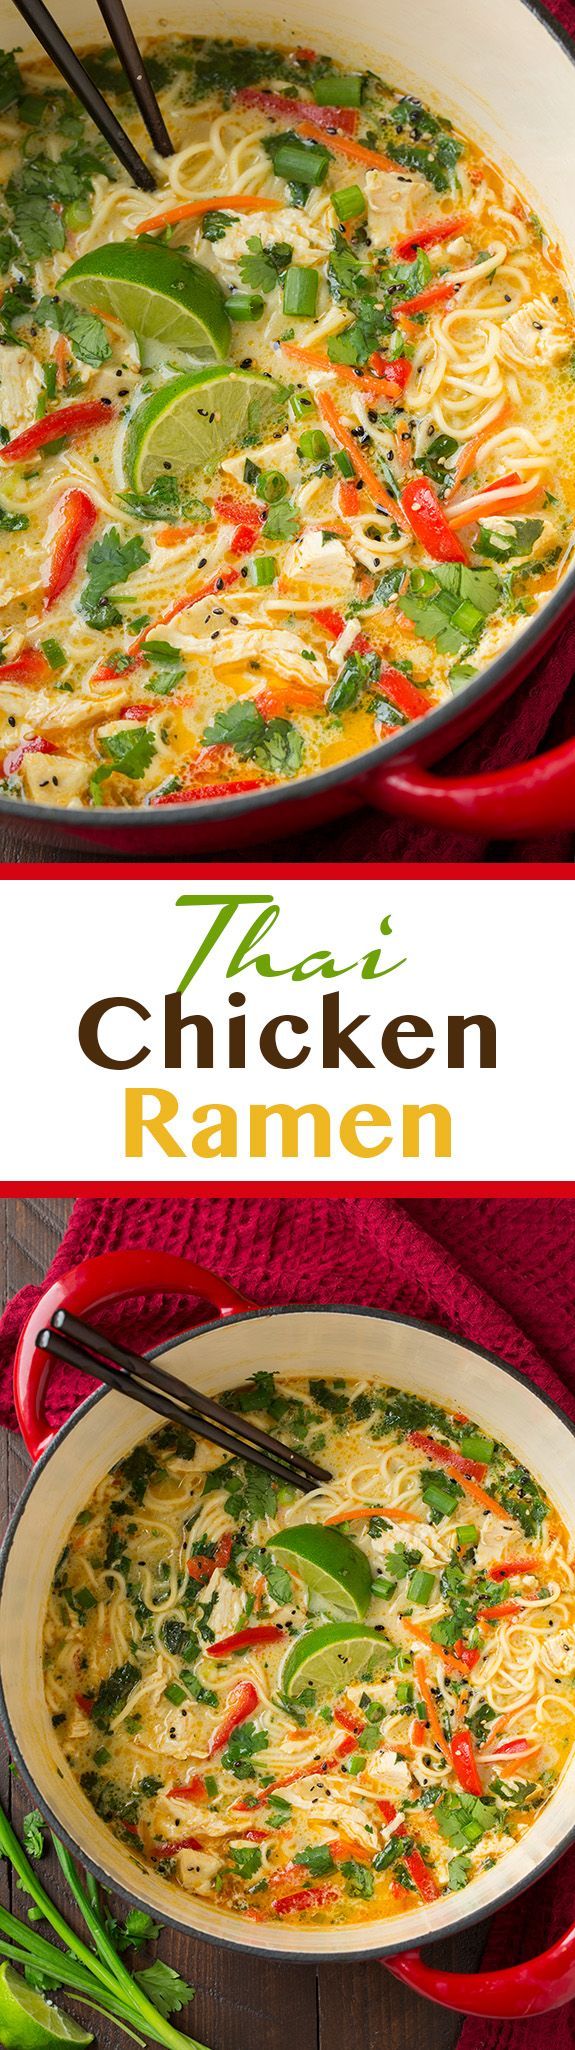 Thai Chicken Ramen – this soup features many layers of flavors, including onion, g